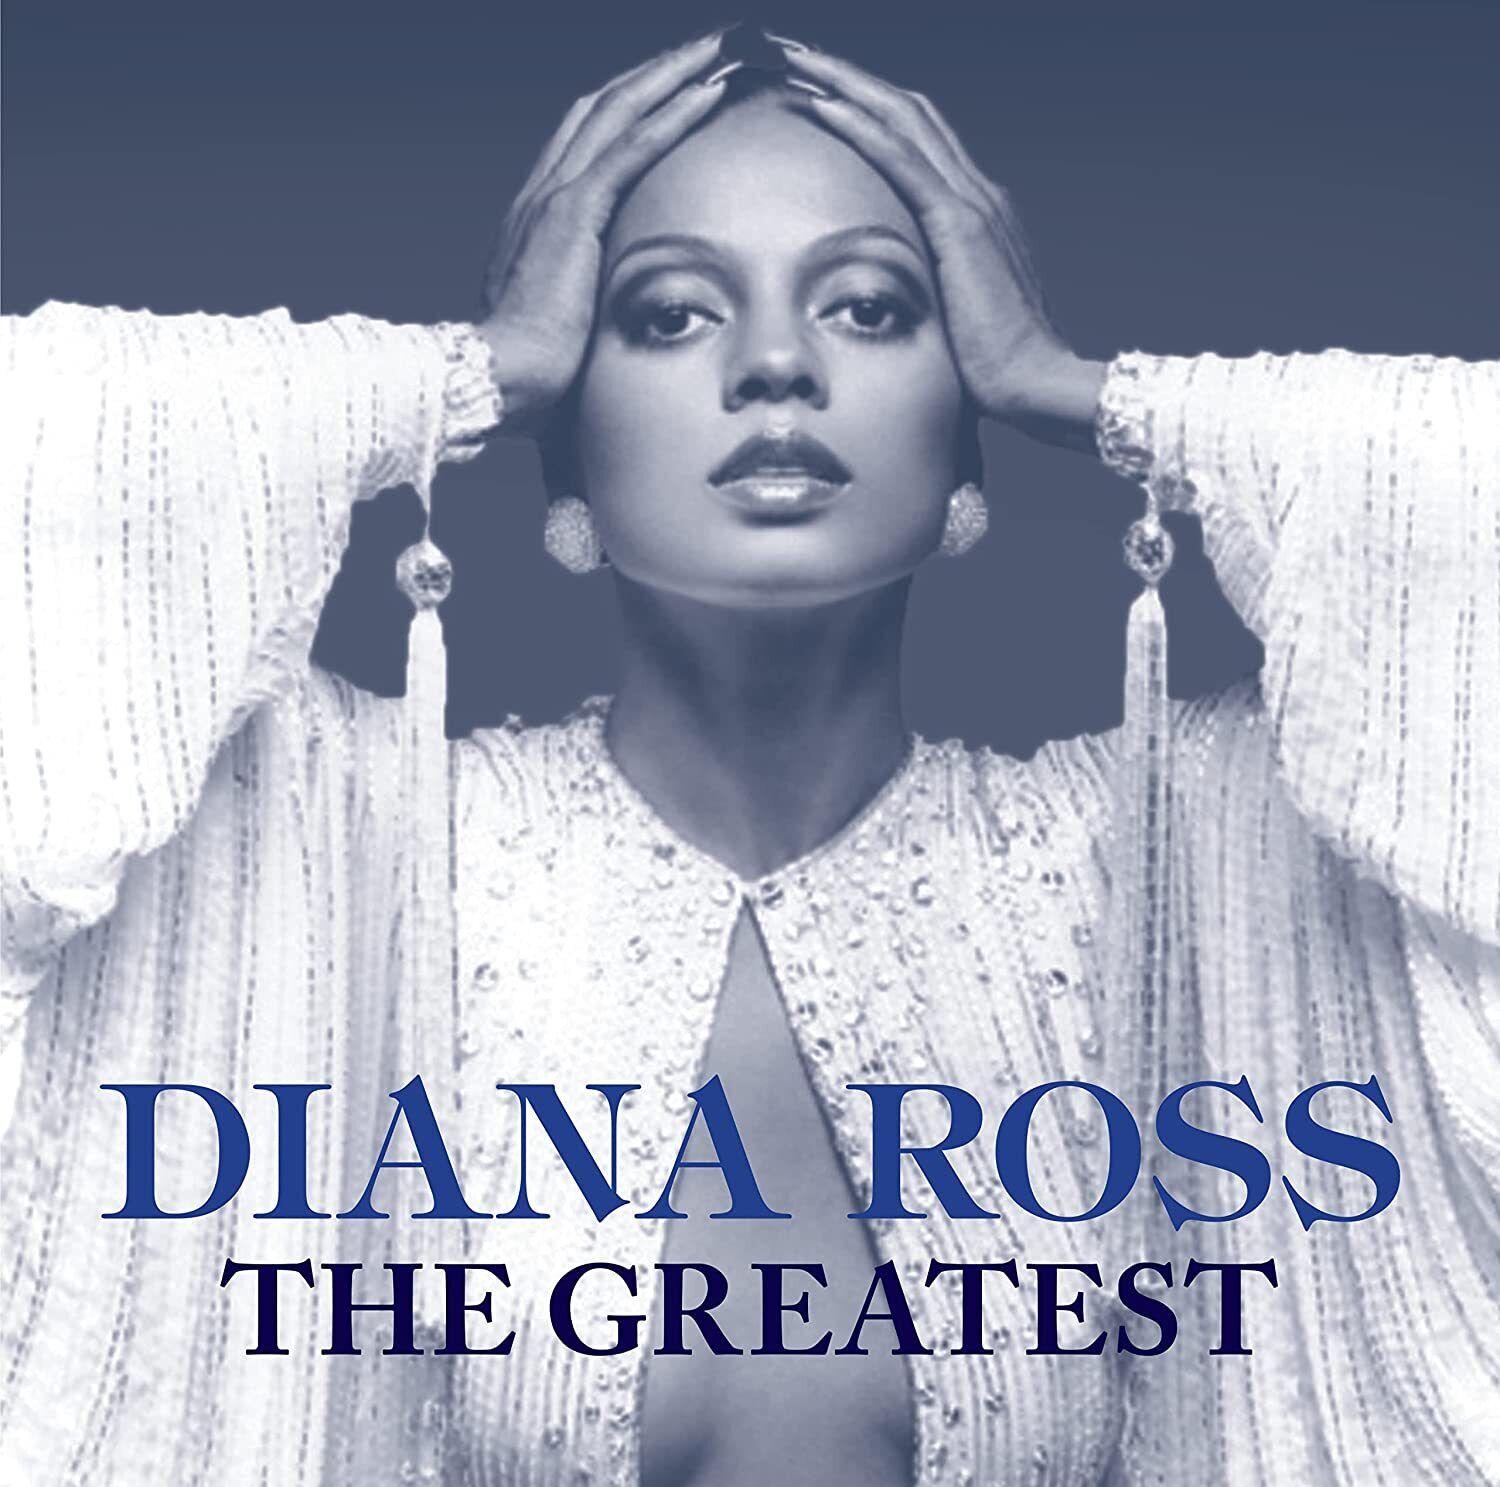 DIANA ROSS THE GREATEST CD (Released June 3rd 2022) - VERY BEST OF / HITS